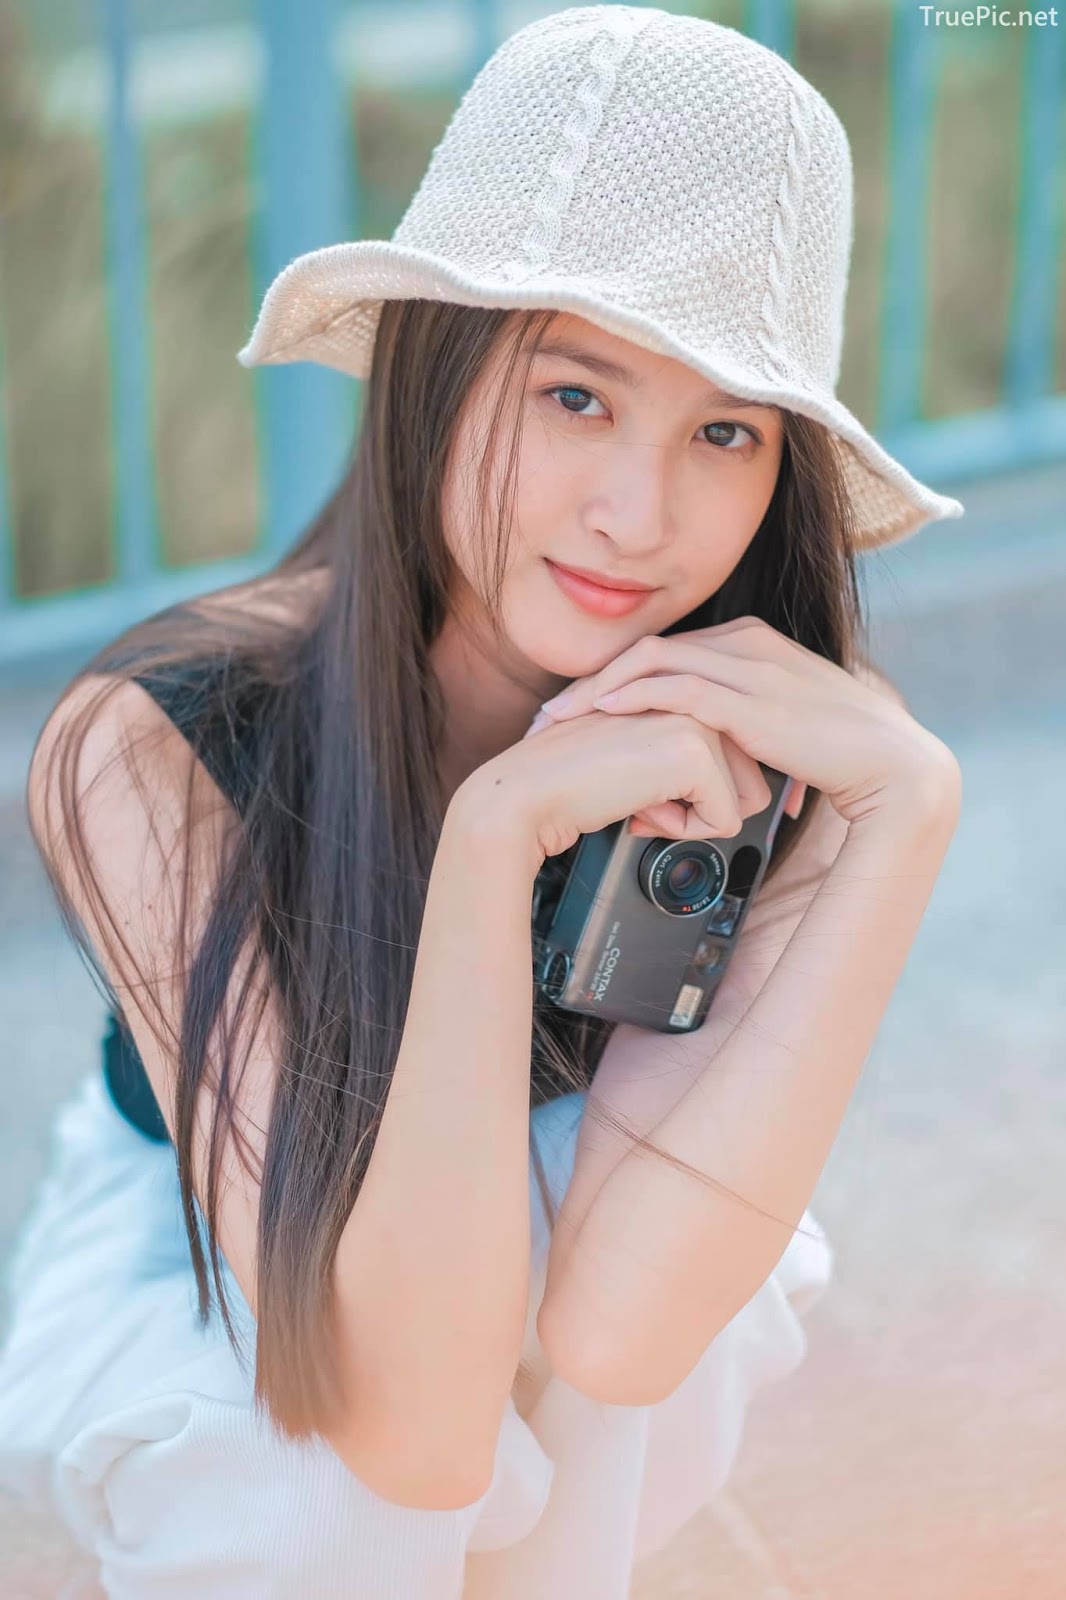 Thailand beauty model View Benyapa - One day practicing as a photographer - Picture 43